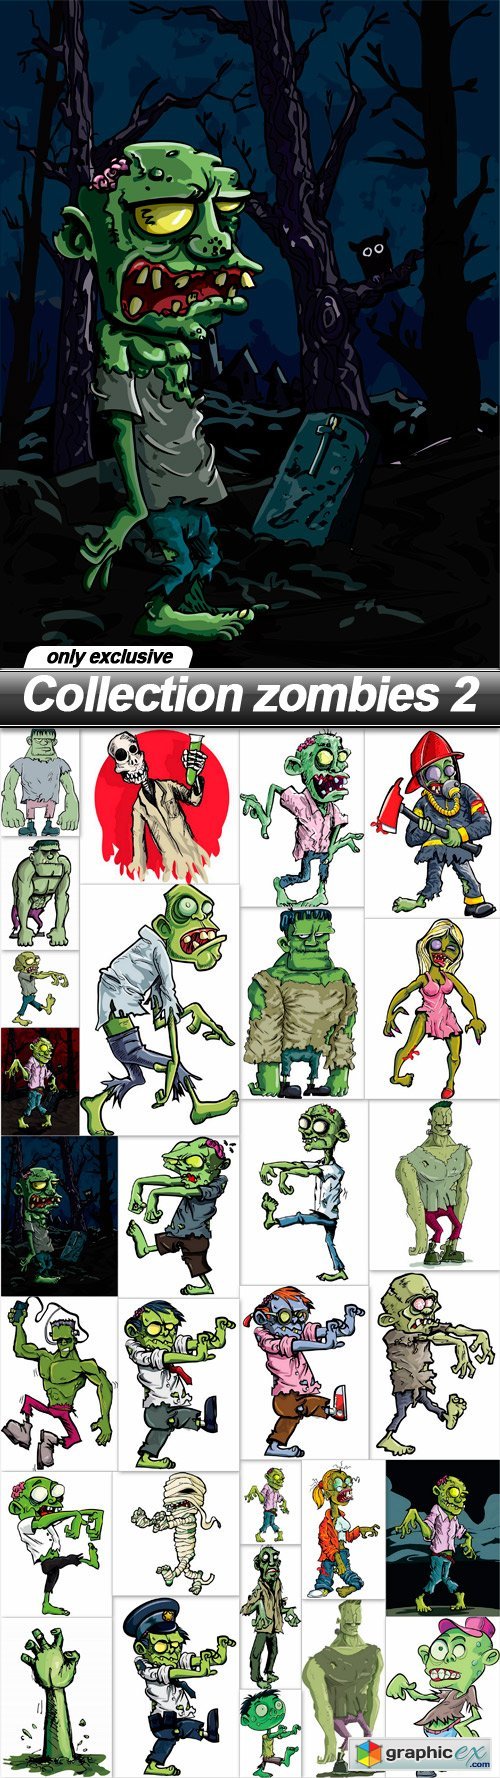 Collection zombies 2 - 29 EPS